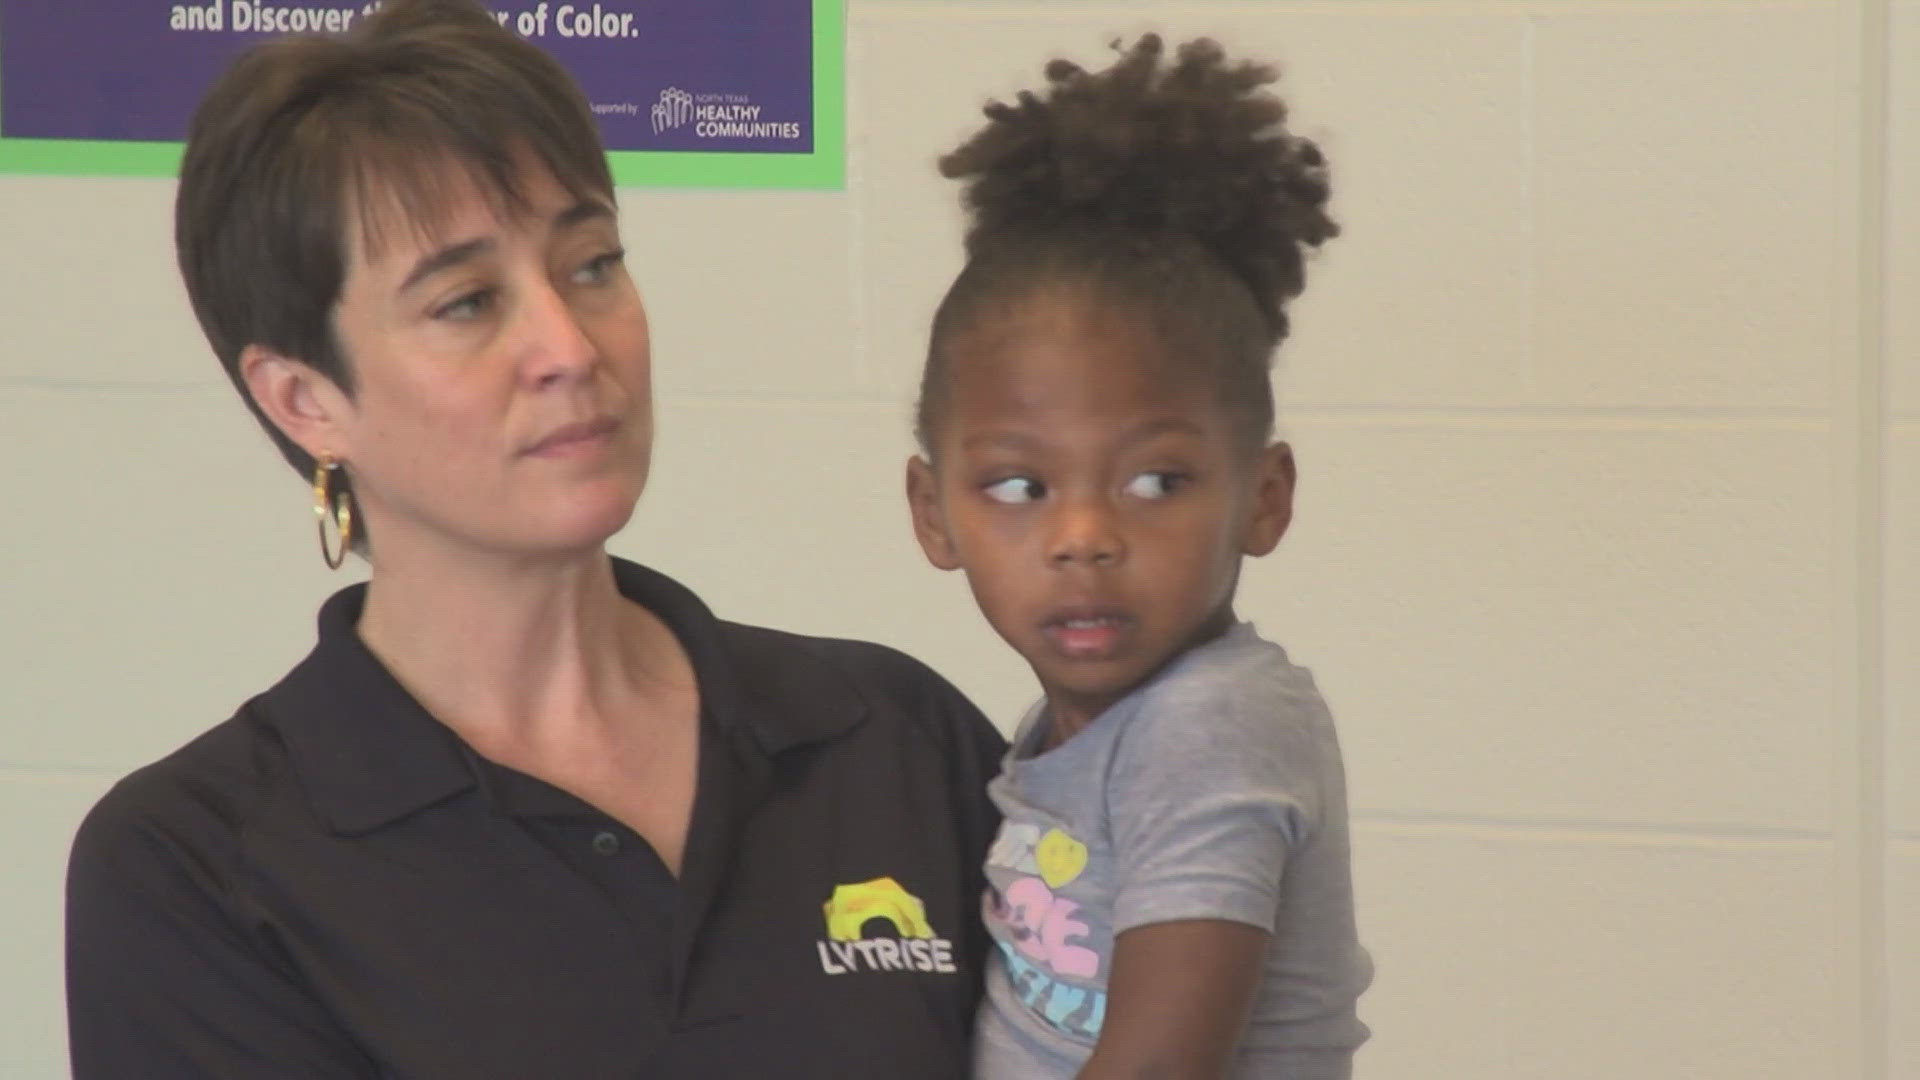 The mother of a 3-year-old shot on May 1st wants to make sure emergency responders know the difference they made coming to the rescue.